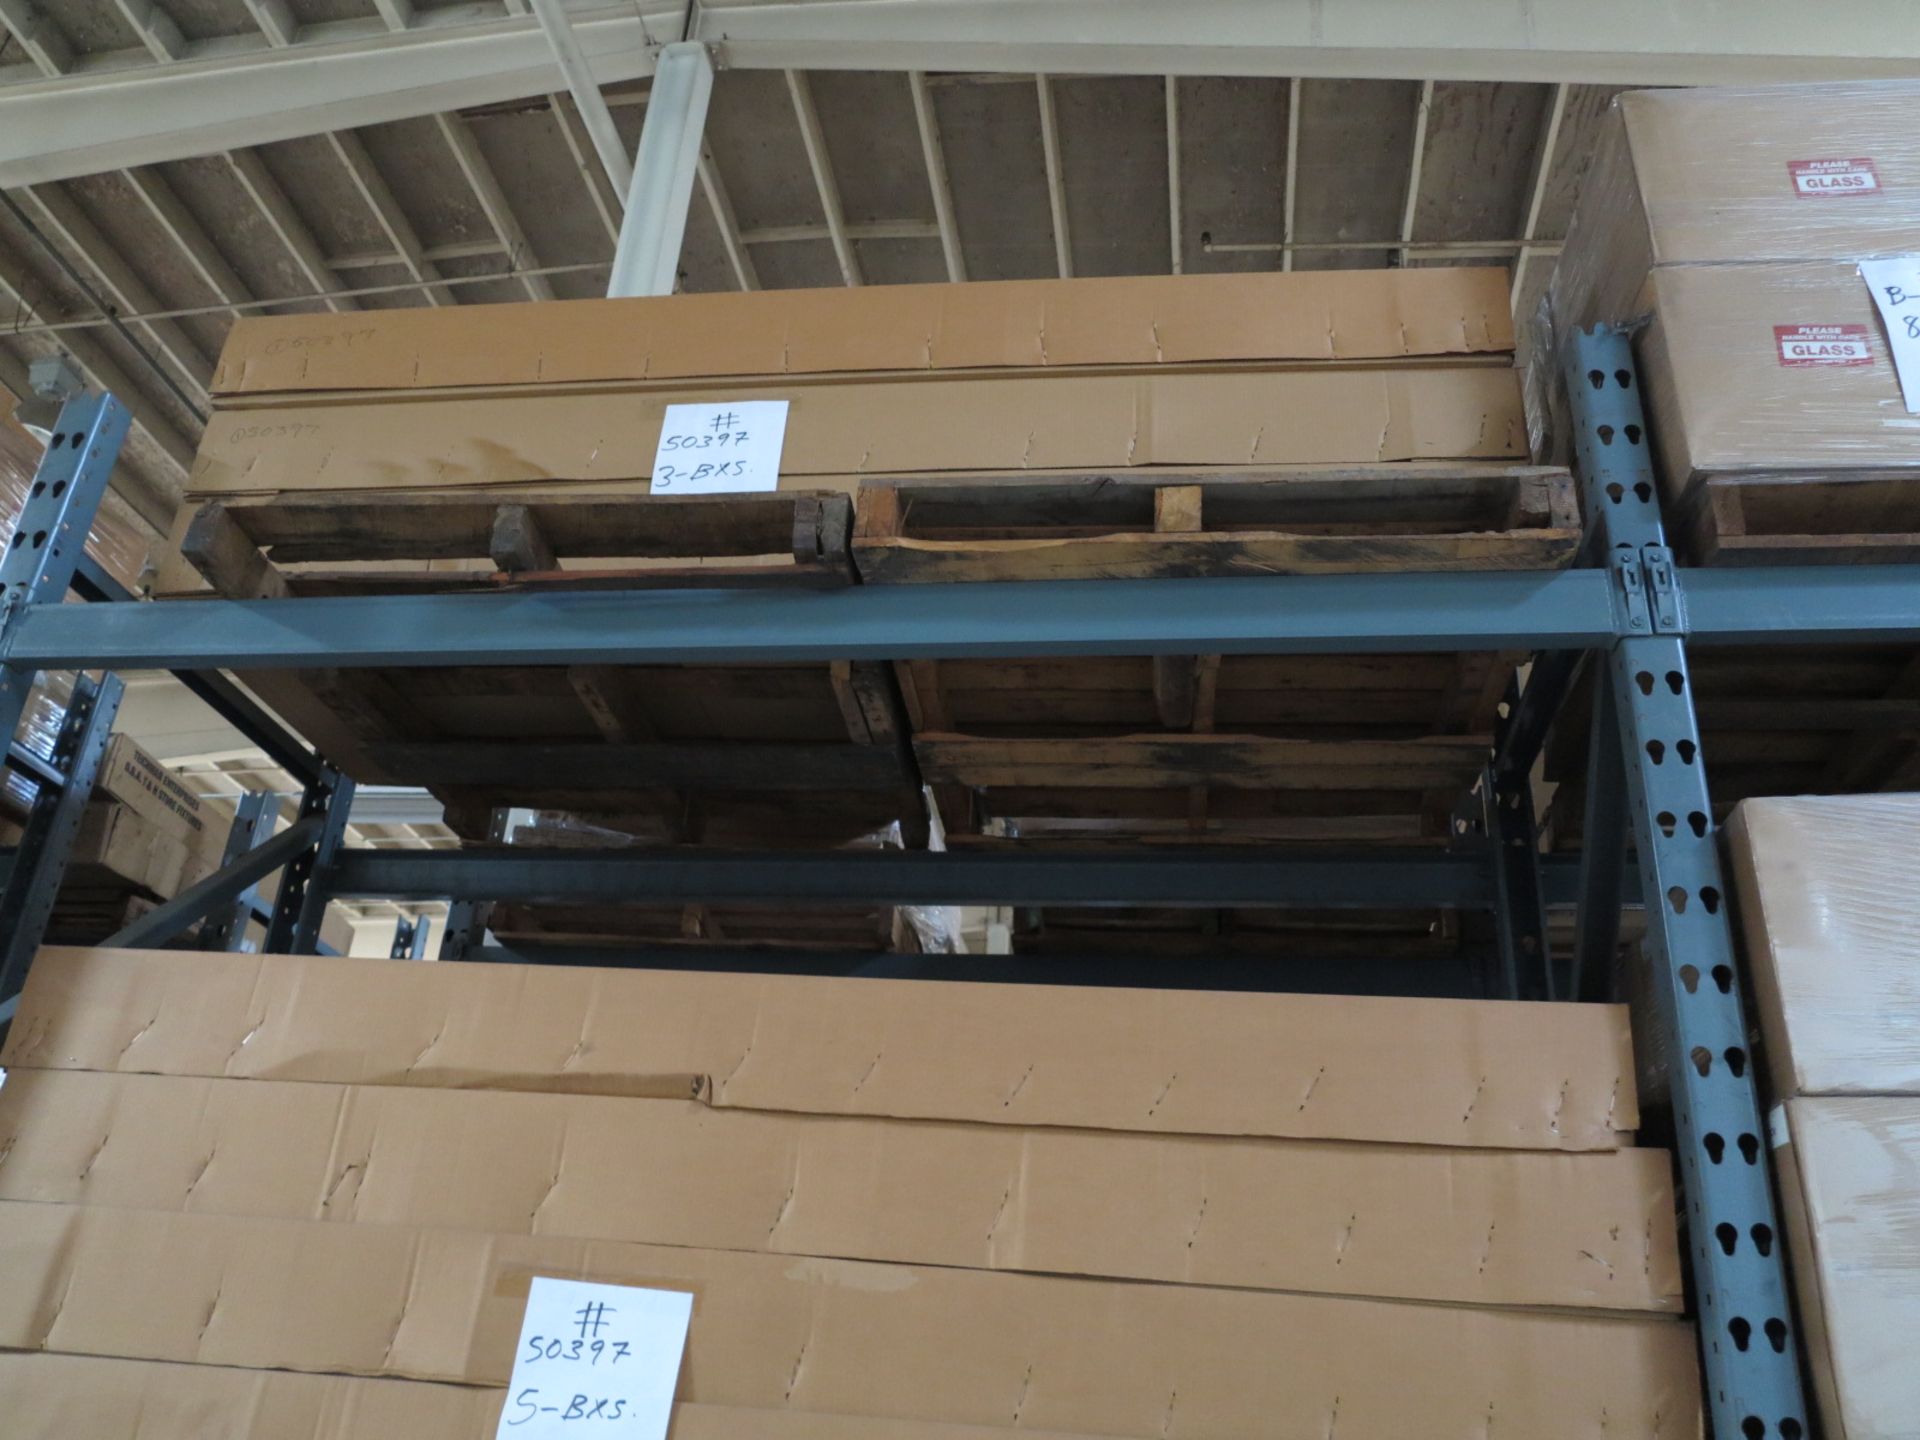 LOT - CONTENTS OF (3) SECTIONS OF PALLET RACK TO INCLUDE: ITEM # 90363, ACCESSORY STAND MIRROR, - Bild 11 aus 11